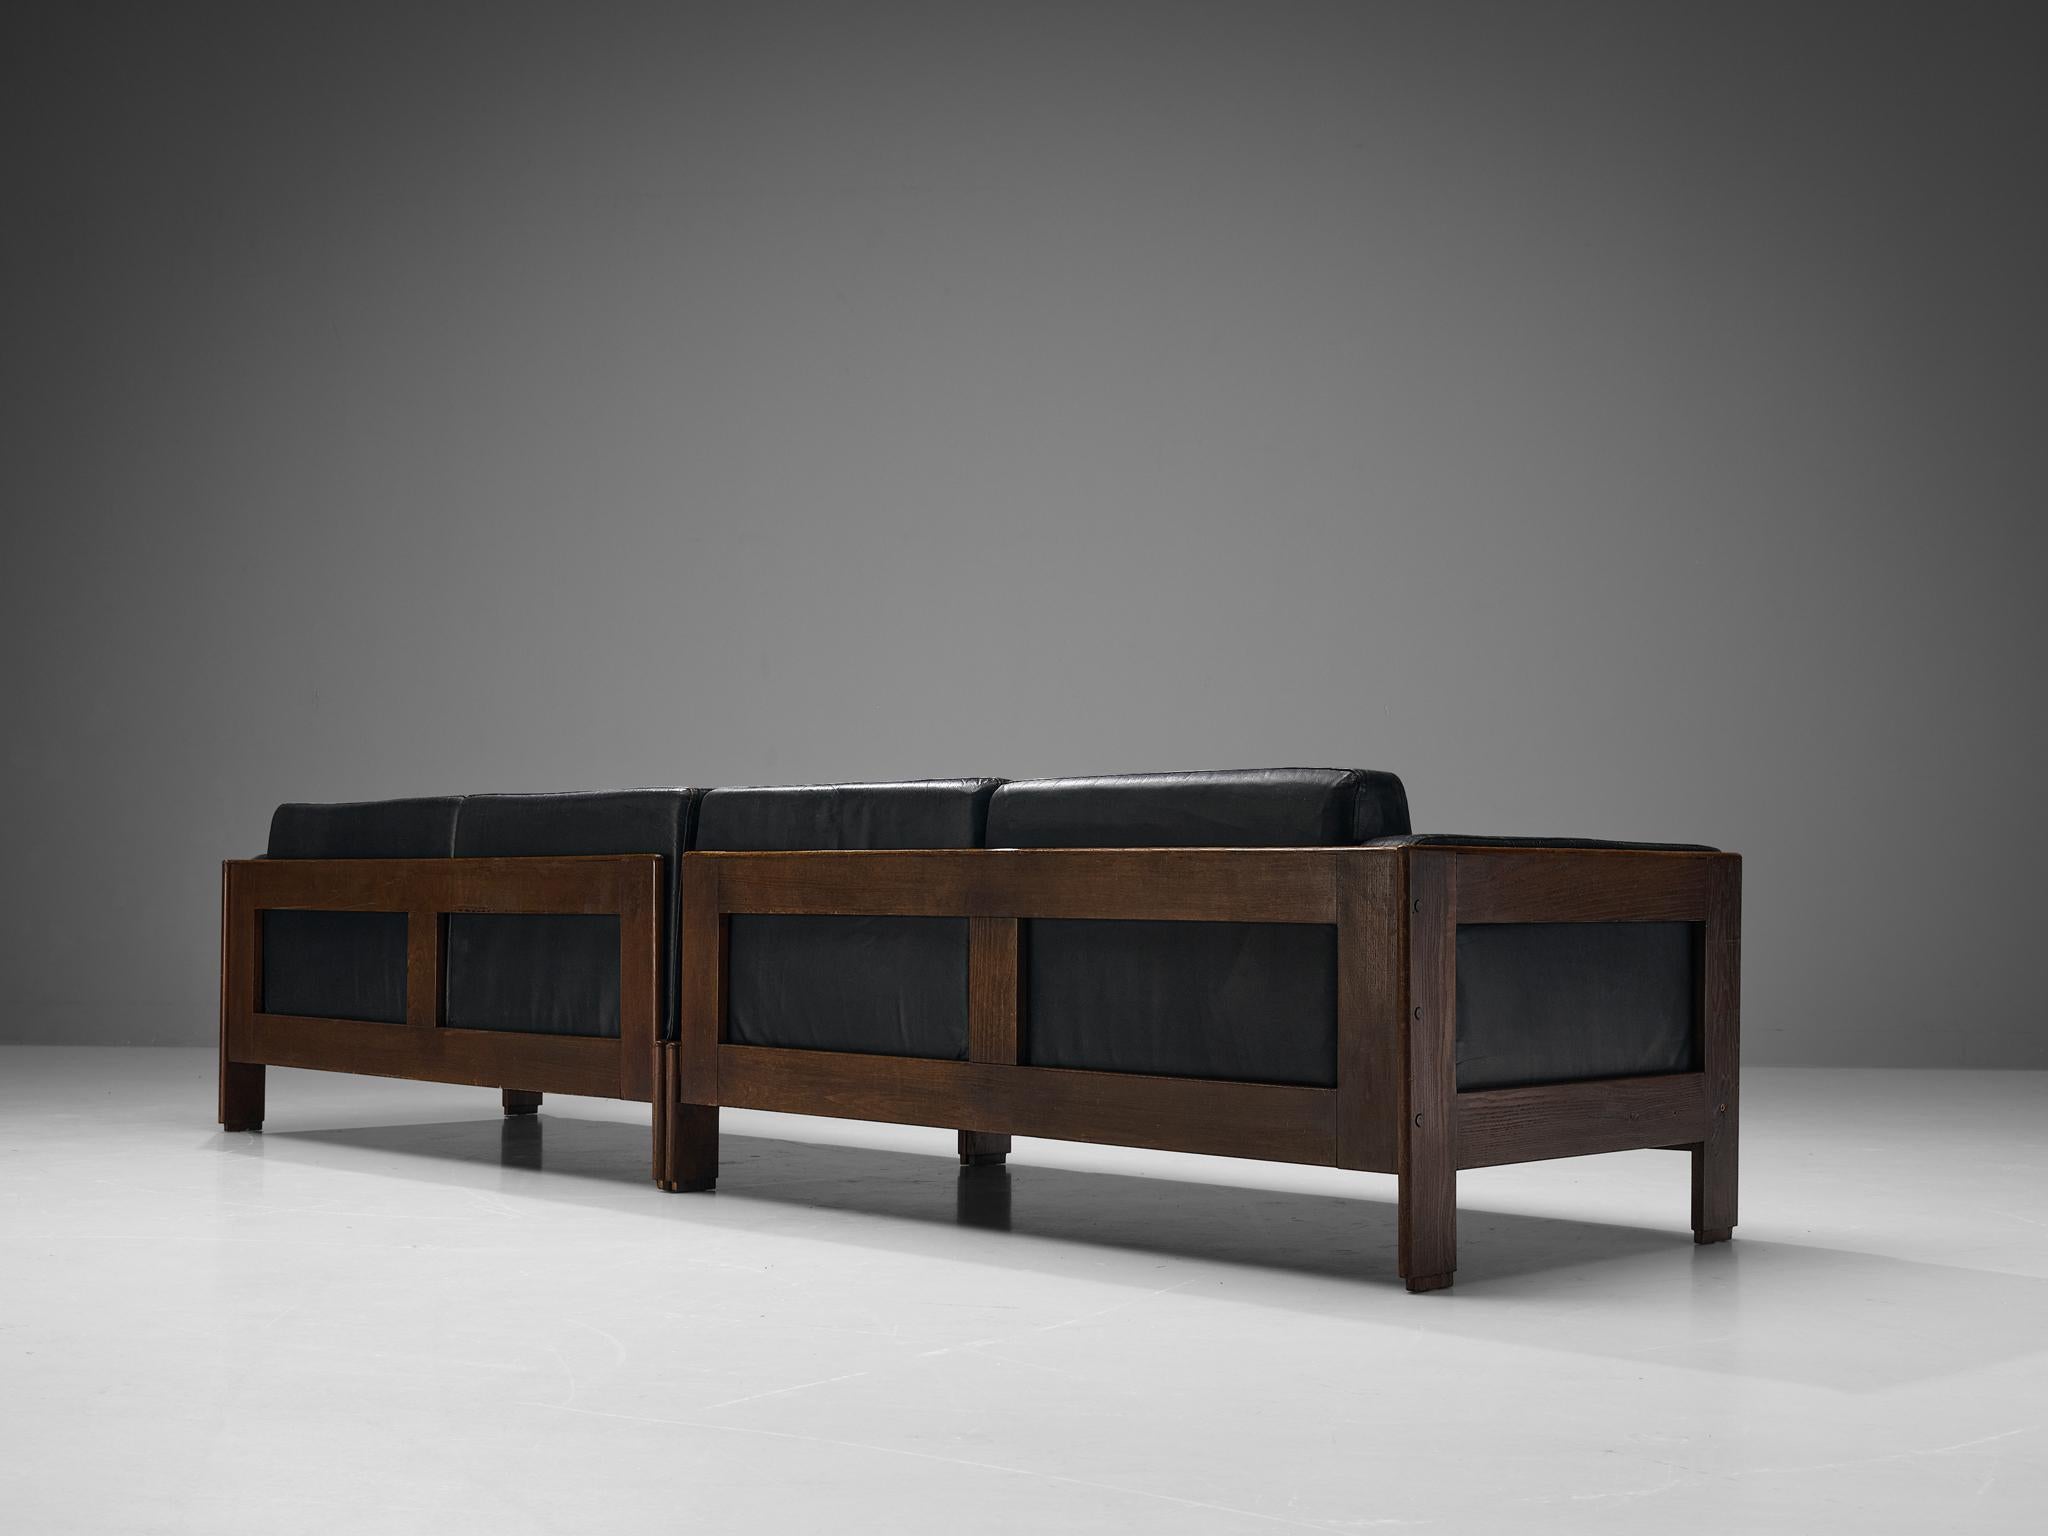 Sofa, stained ash, leather, Italy, 1970s

This large streamlined sofa truly intensifies the experience of sitting itself and is a standout in any modern room. The framework is well-designed featuring clear lines and geometrical shapes and strongly